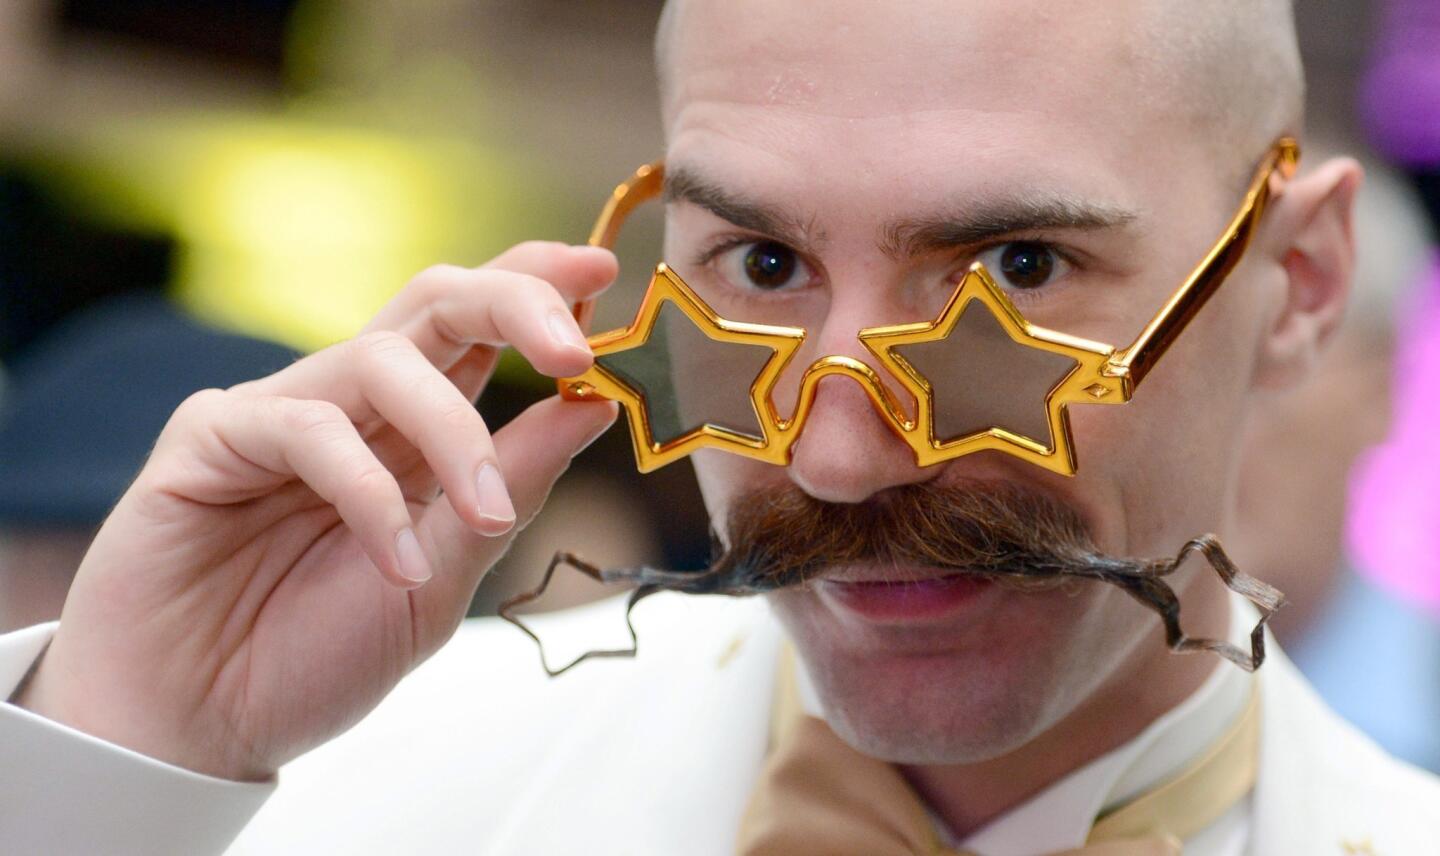 Dan Lawlor's star-shaped mustache tips -- and gold star sunglasses -- earned Lawlor first place for freestyle mustache.